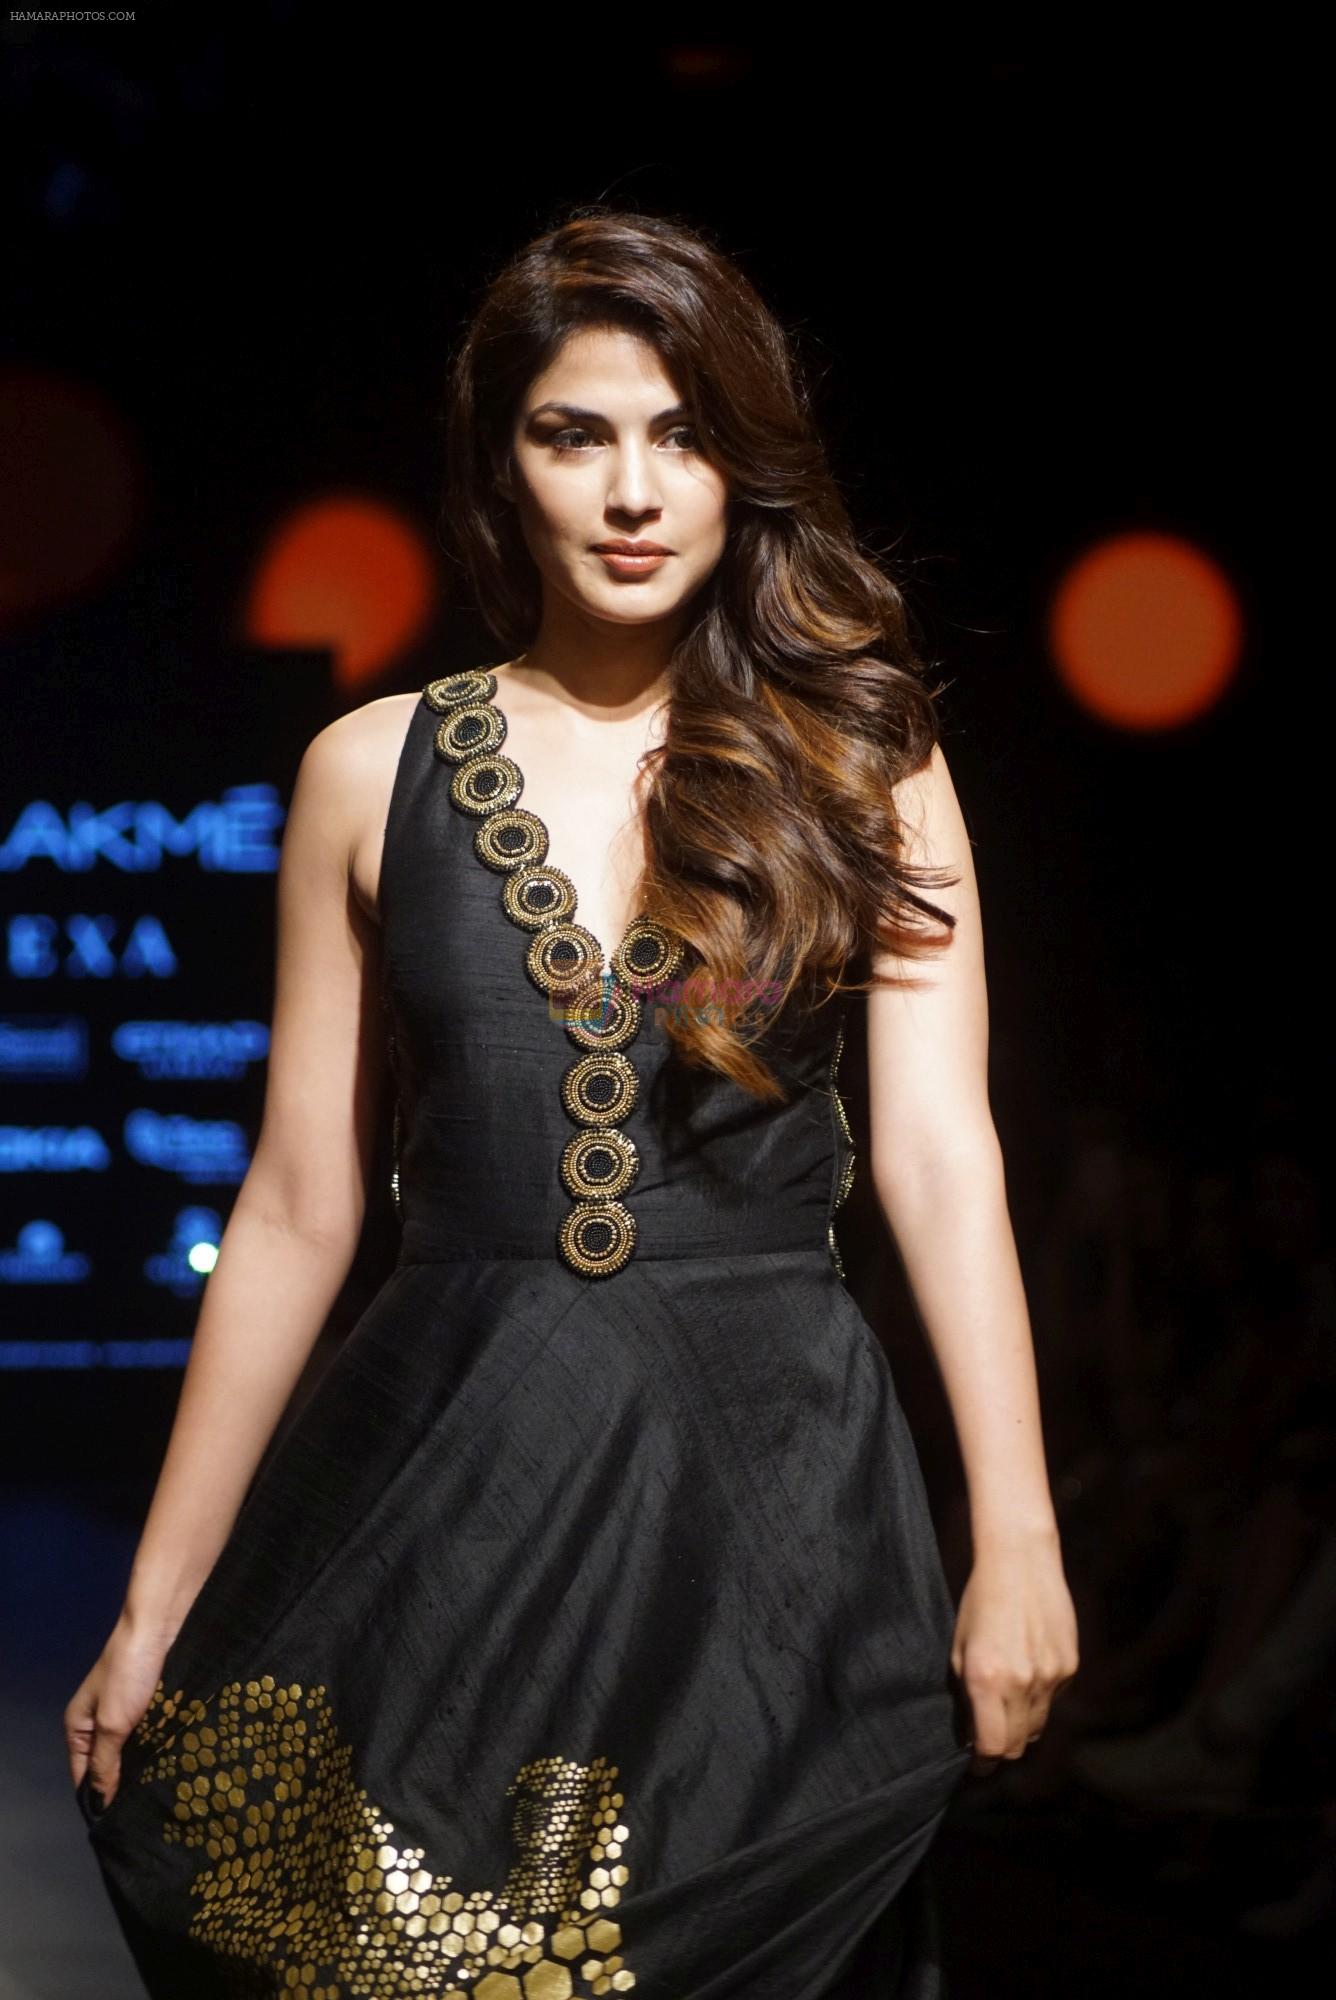 Rhea Chakraborty as the Show stopper for ABRAHAM & THAKORE RUNWAY at Lakme Fashion Week on 22nd Aug 2018